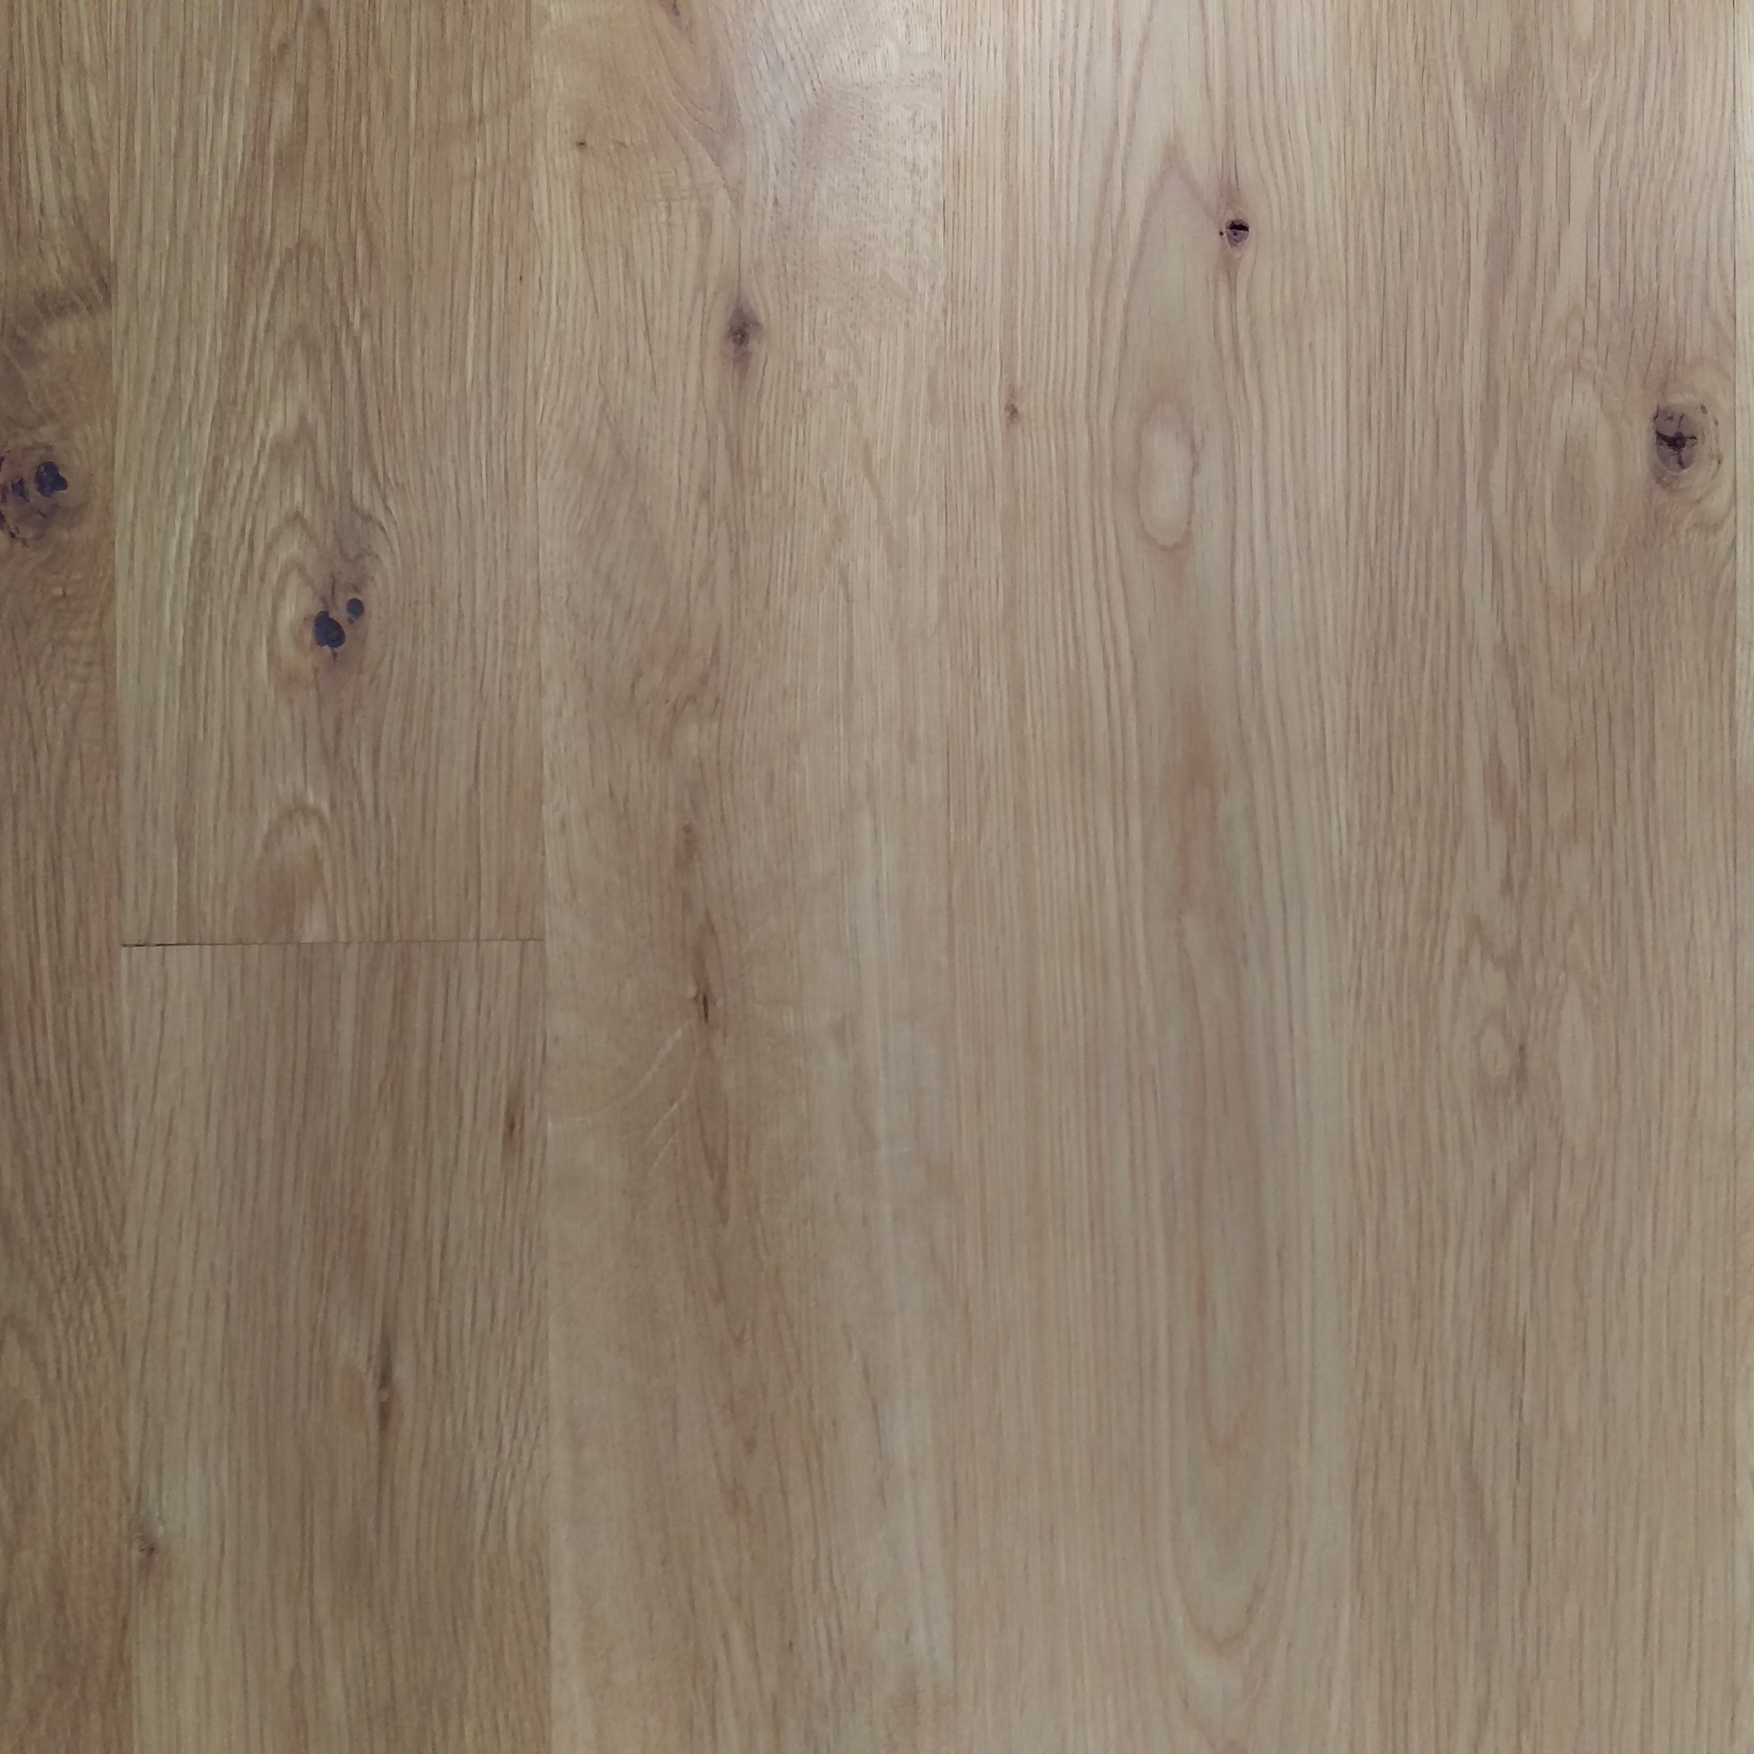 Live-Sawn White Oak - Character grade, available in long lengths.